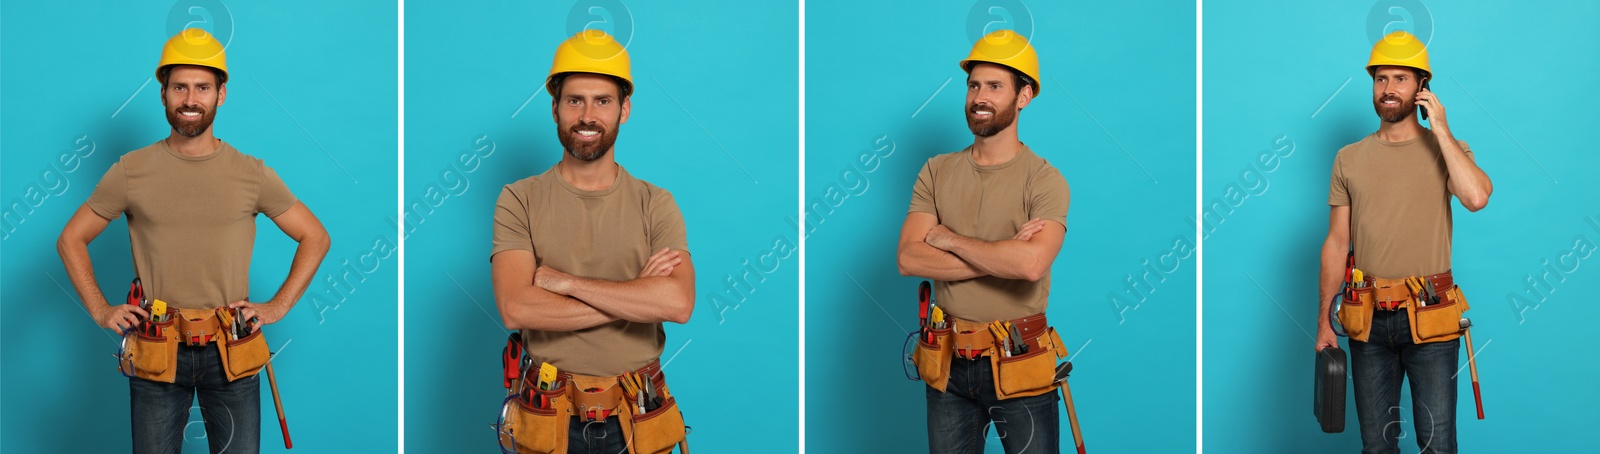 Image of Photos of builder with construction tools on light blue background, collage design